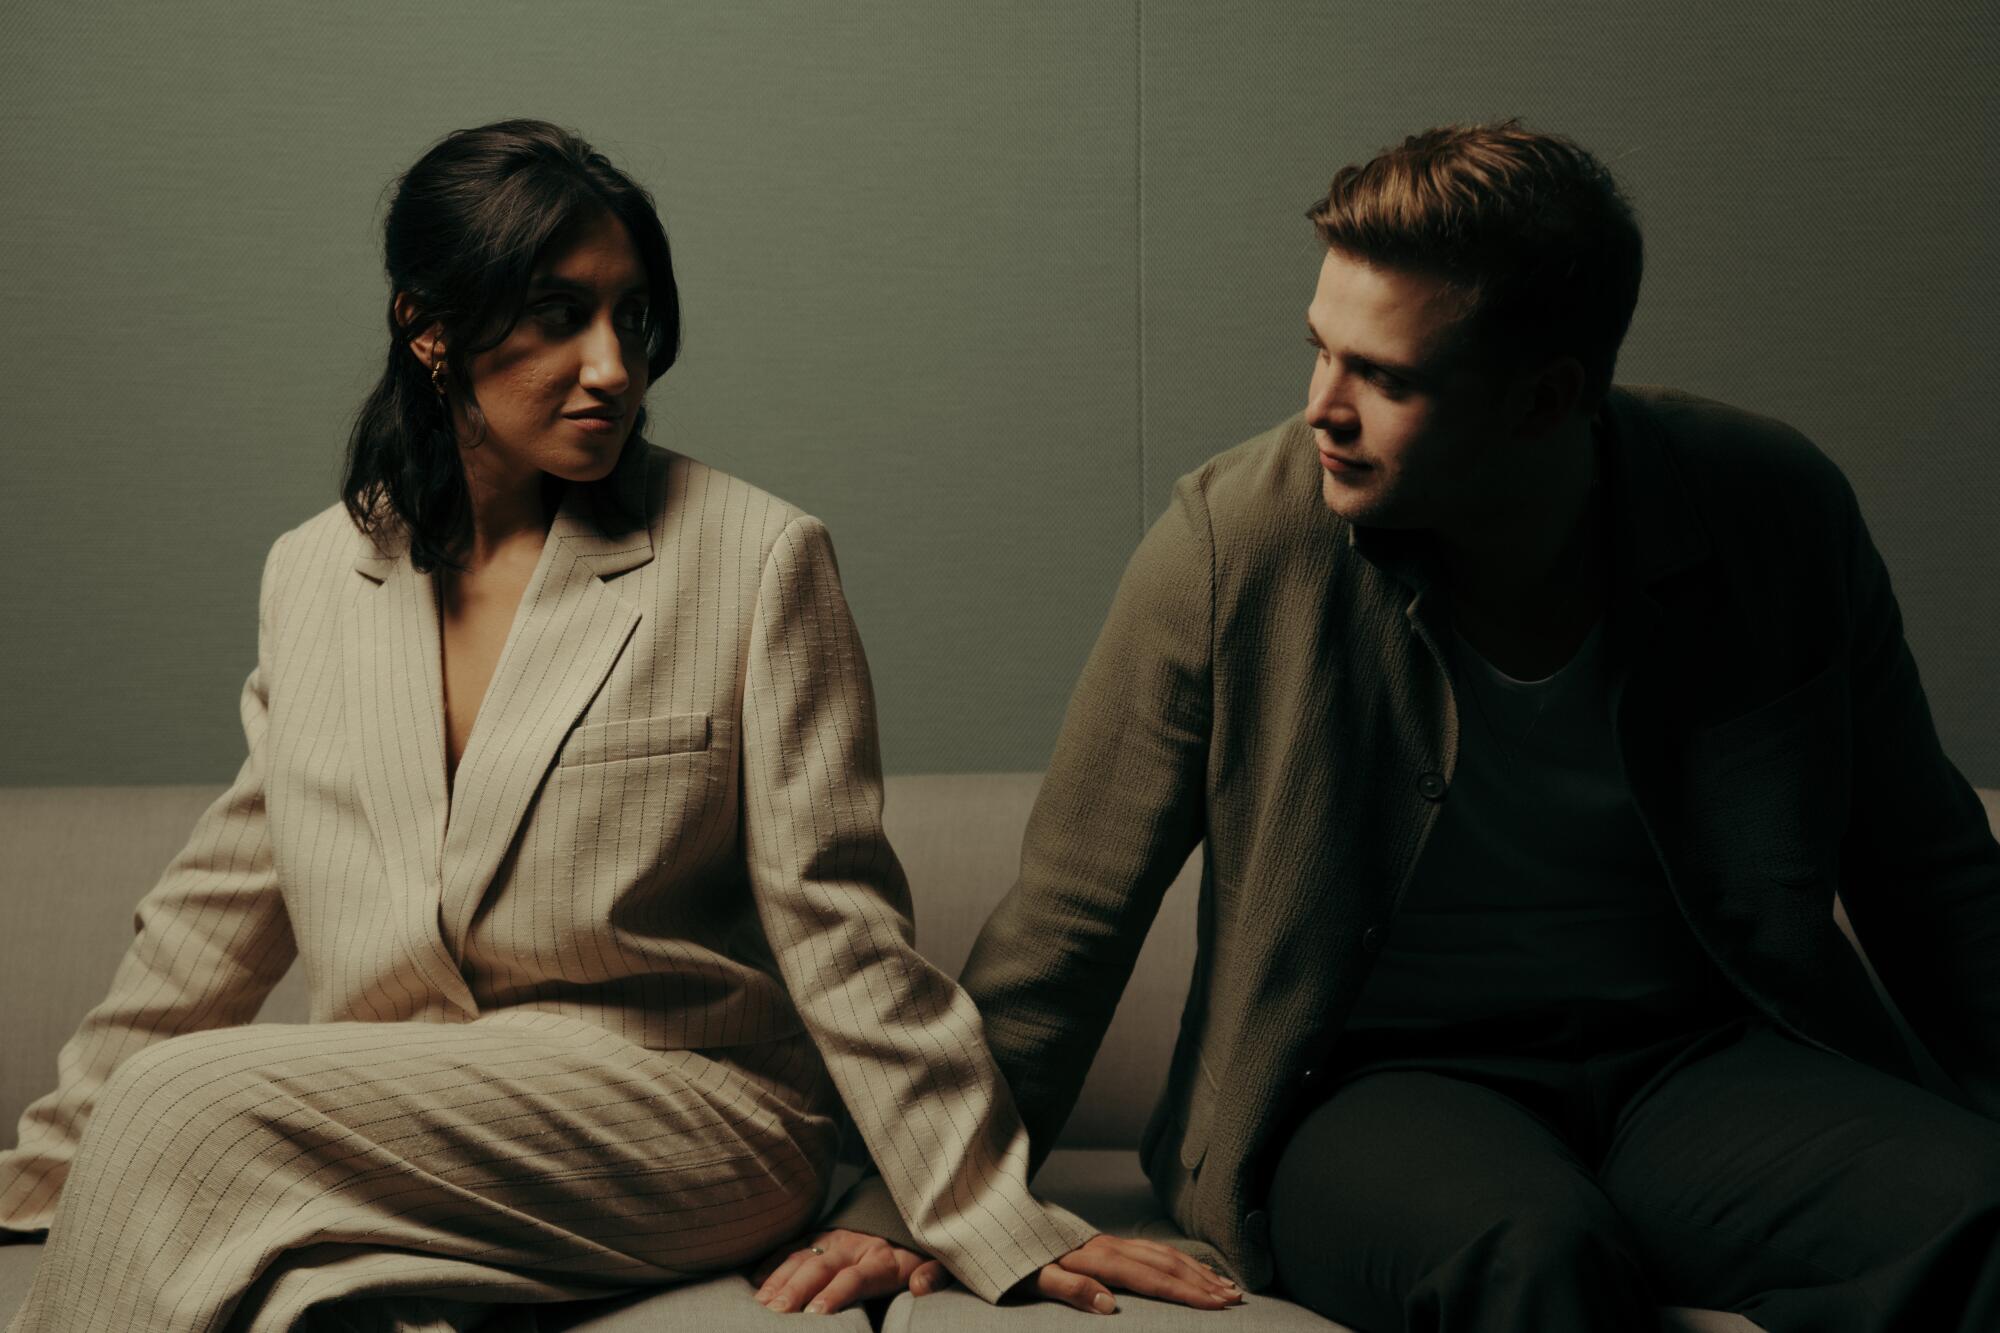 A woman in beige suit sits next to and looks at a man in a brown coat.